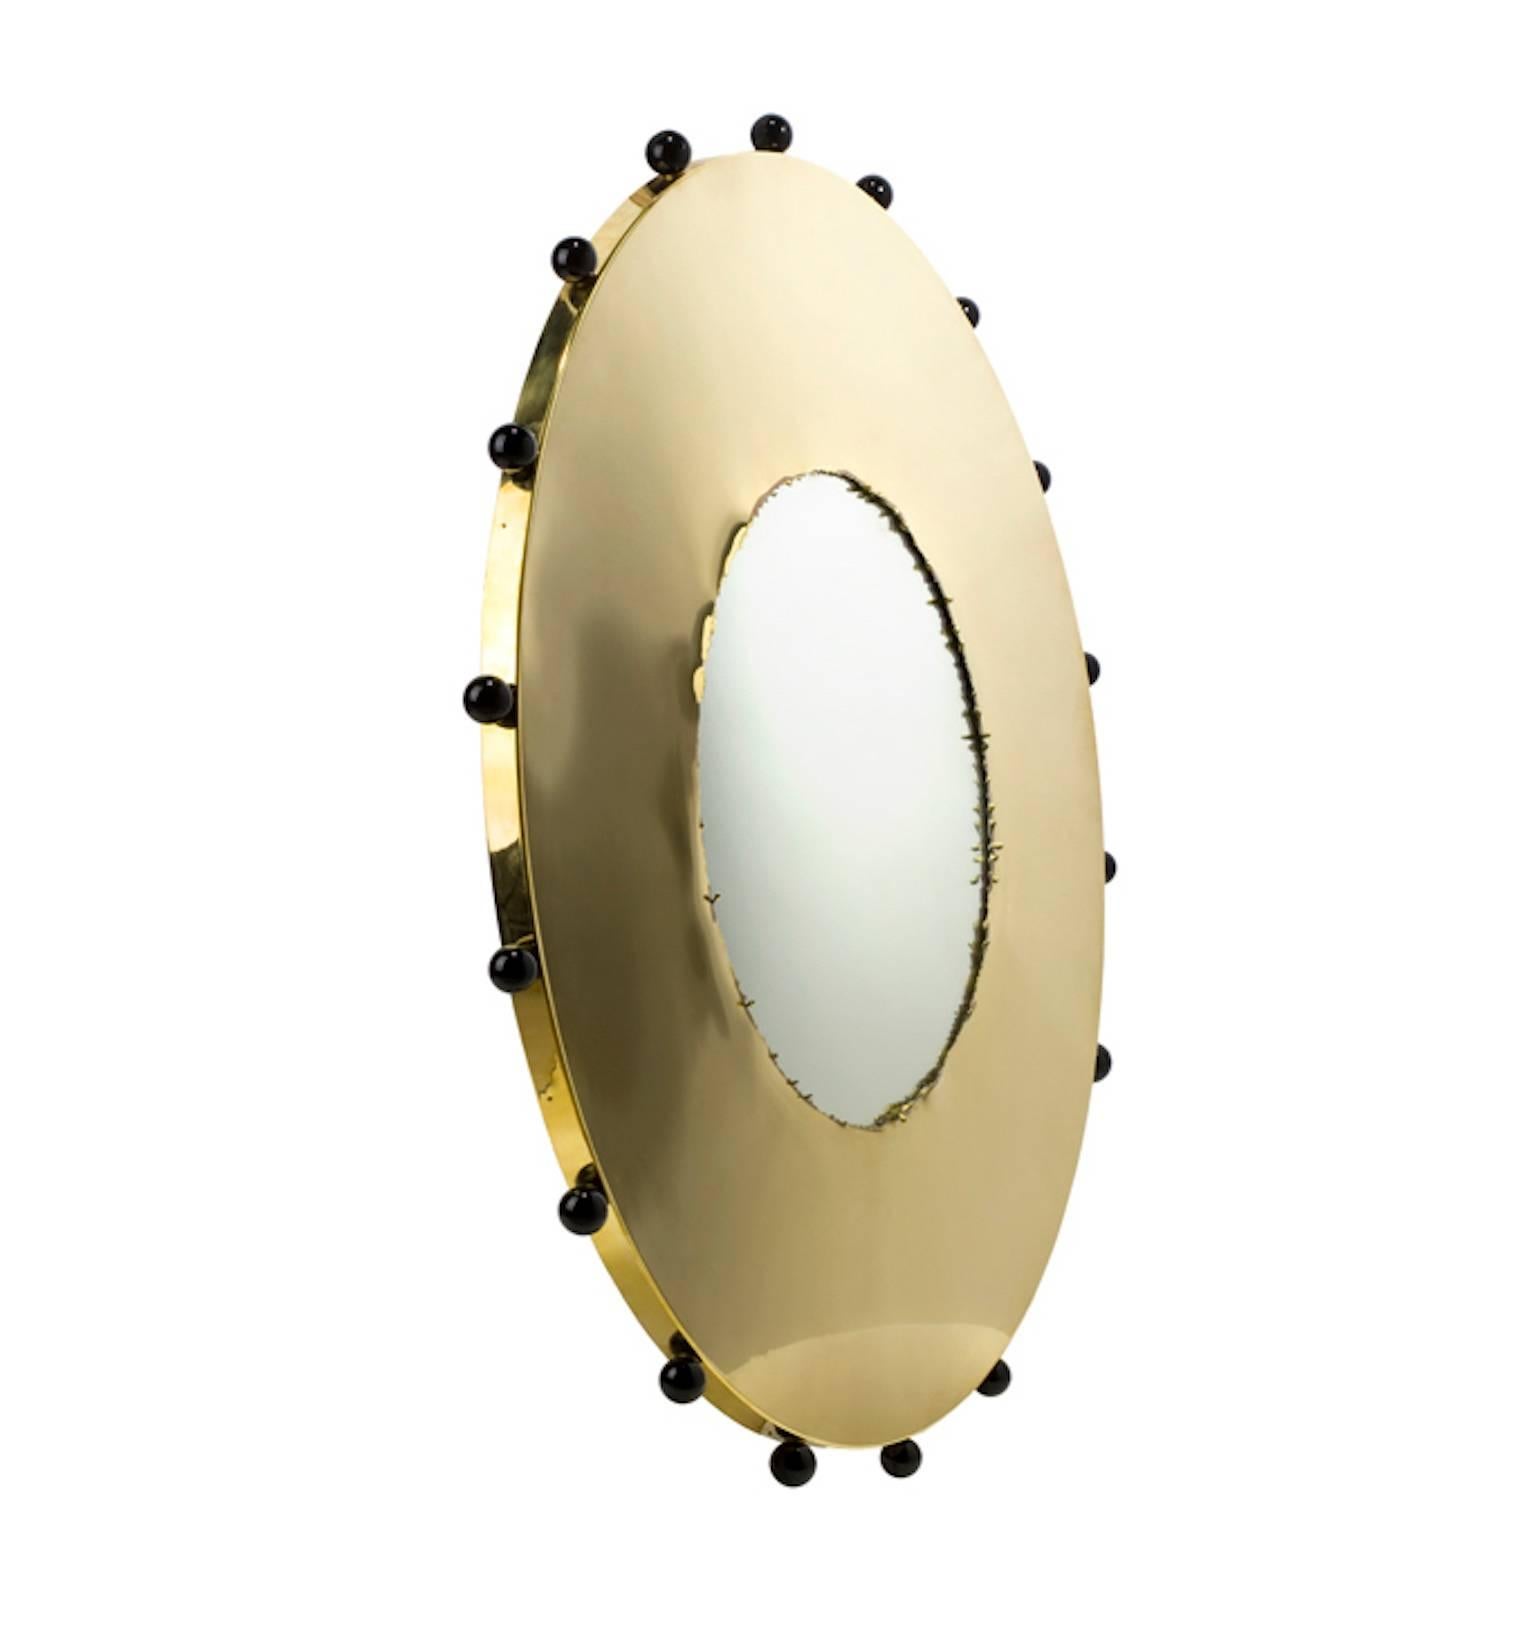 The clown circle mirror is manufactured in Italy using polished brass with a torn liquid effect applied to the centre of the brass. The design is finished with hand formed Murano glass orbs.
The brass is un-lacquered and natural so will take on a